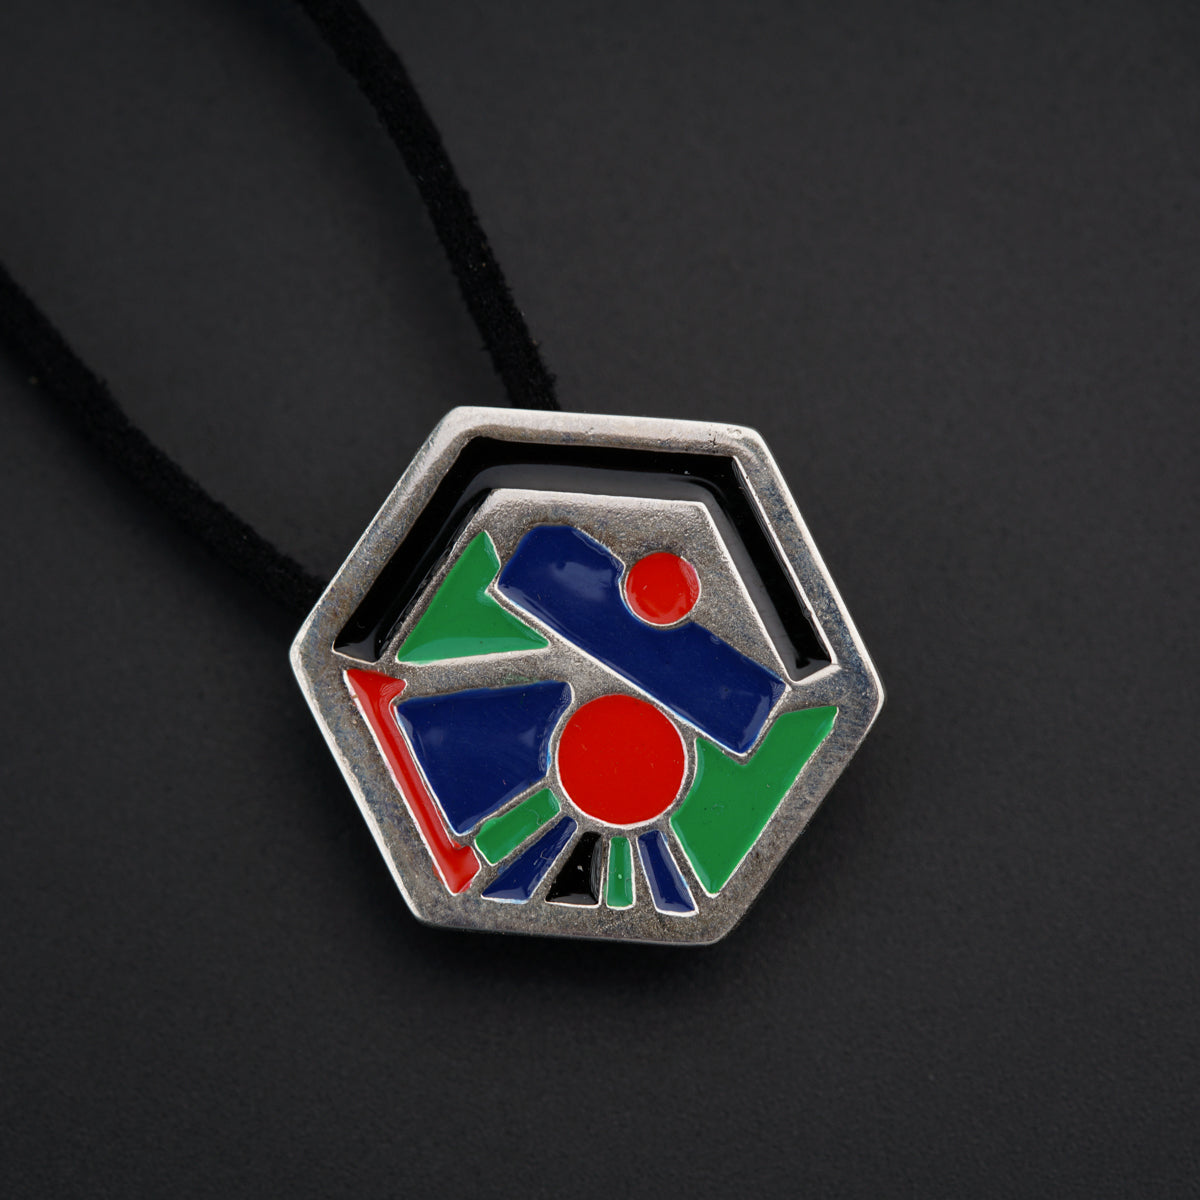 a pendant with a colorful design on a black background